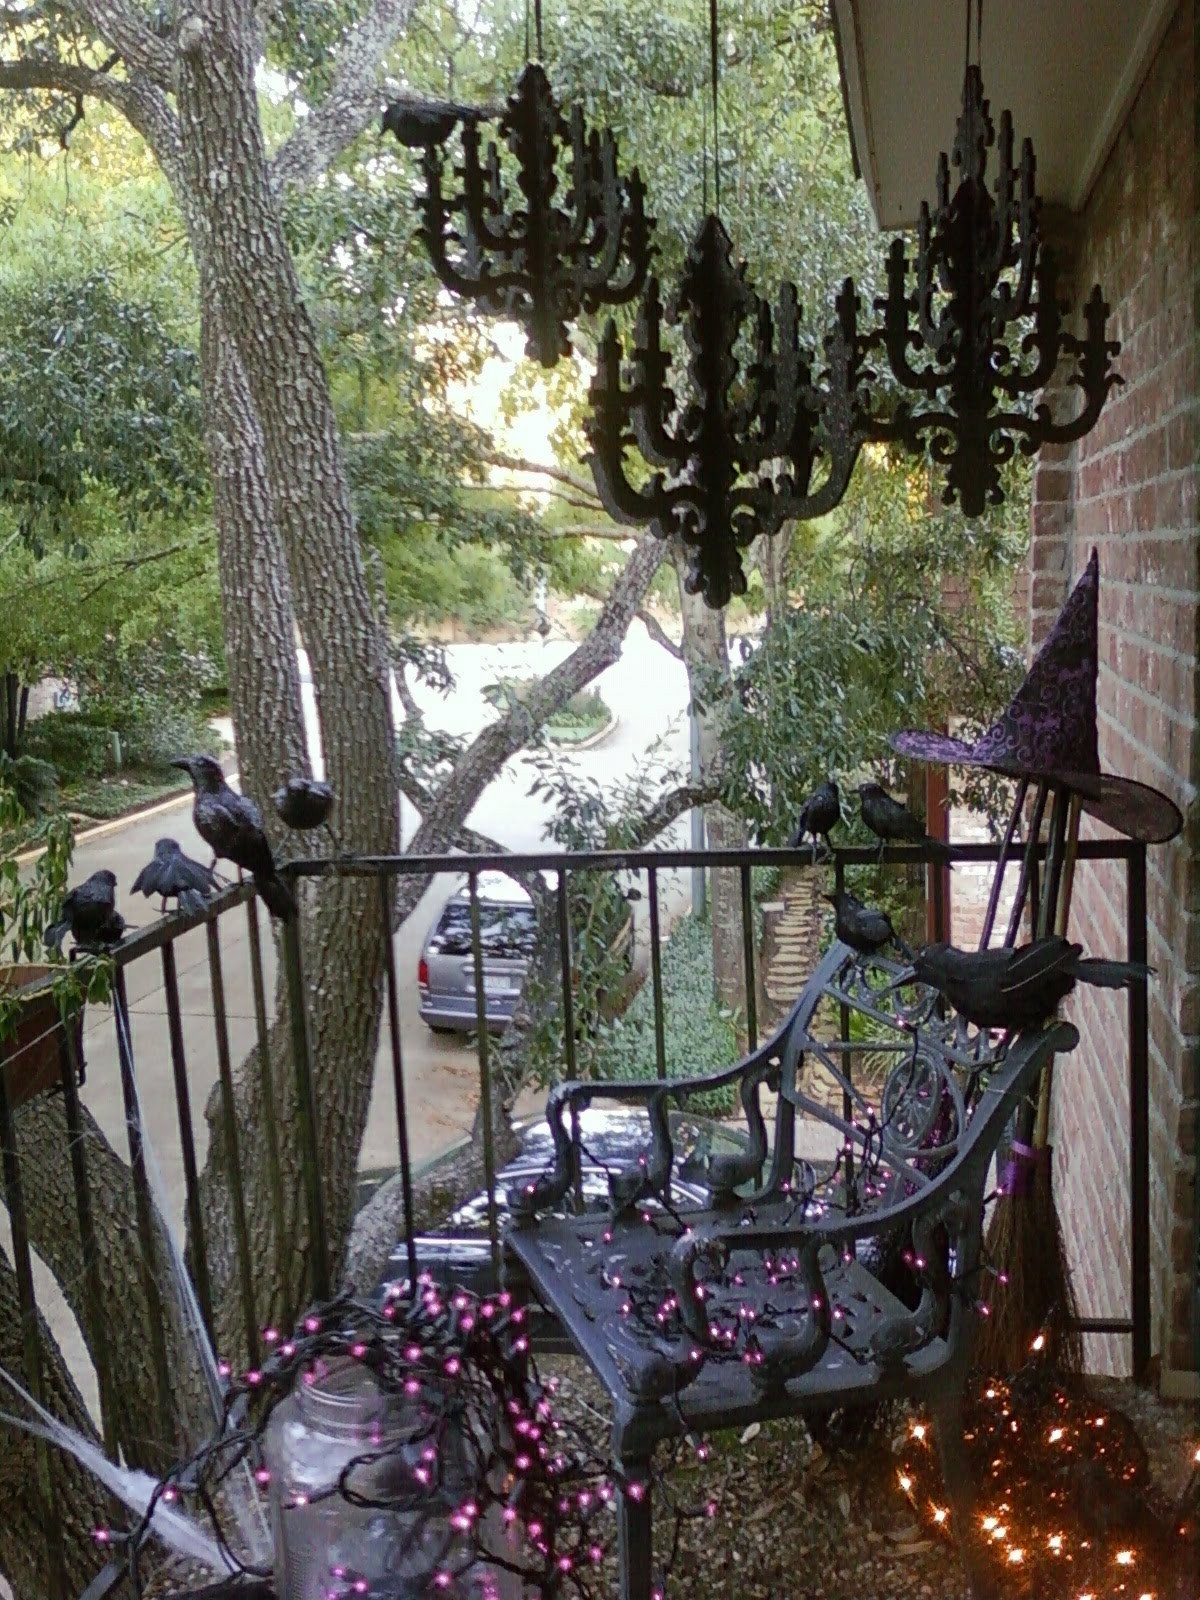 Halloween Balcony Decorating Ideas
 interior spaceLIFT iS Easy Halloween Decorating with